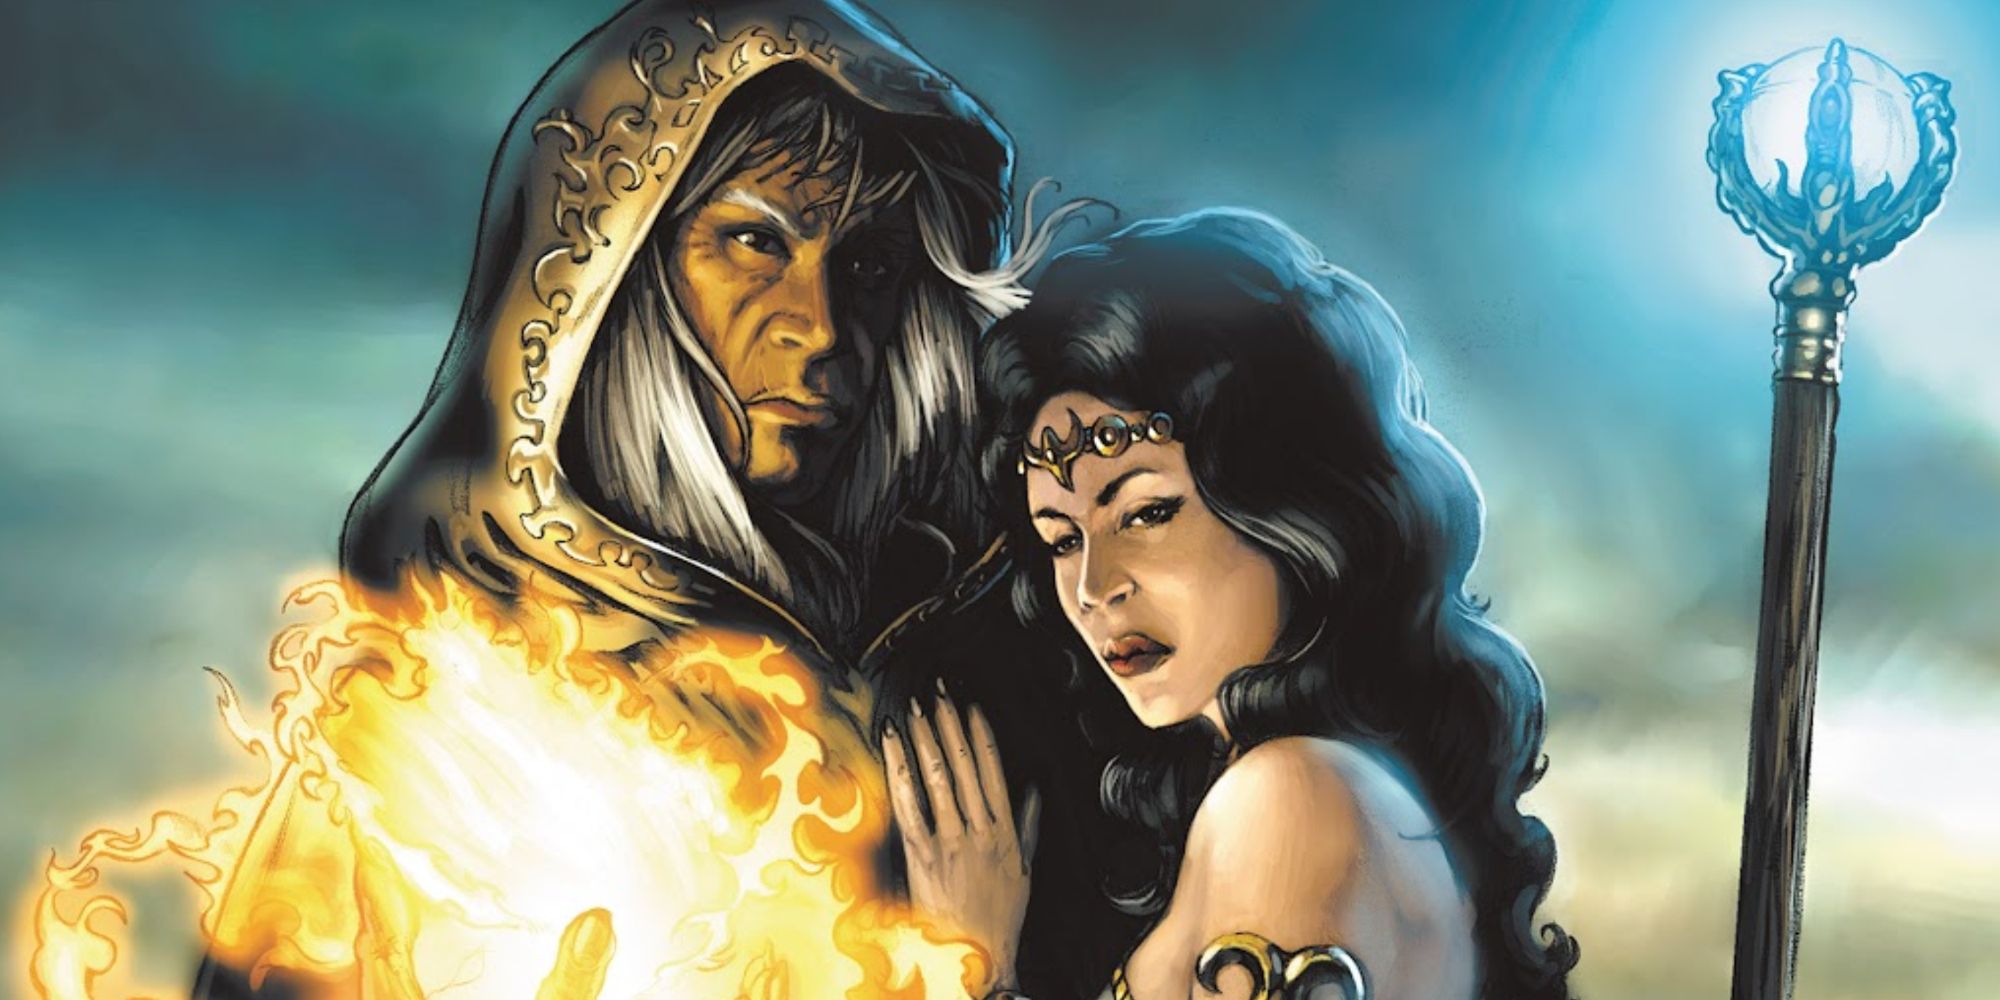 Raistlin Majere and Lady Crysiana on the cover of the Dungeons & Dragons Dragonlance Time of the Twins comic